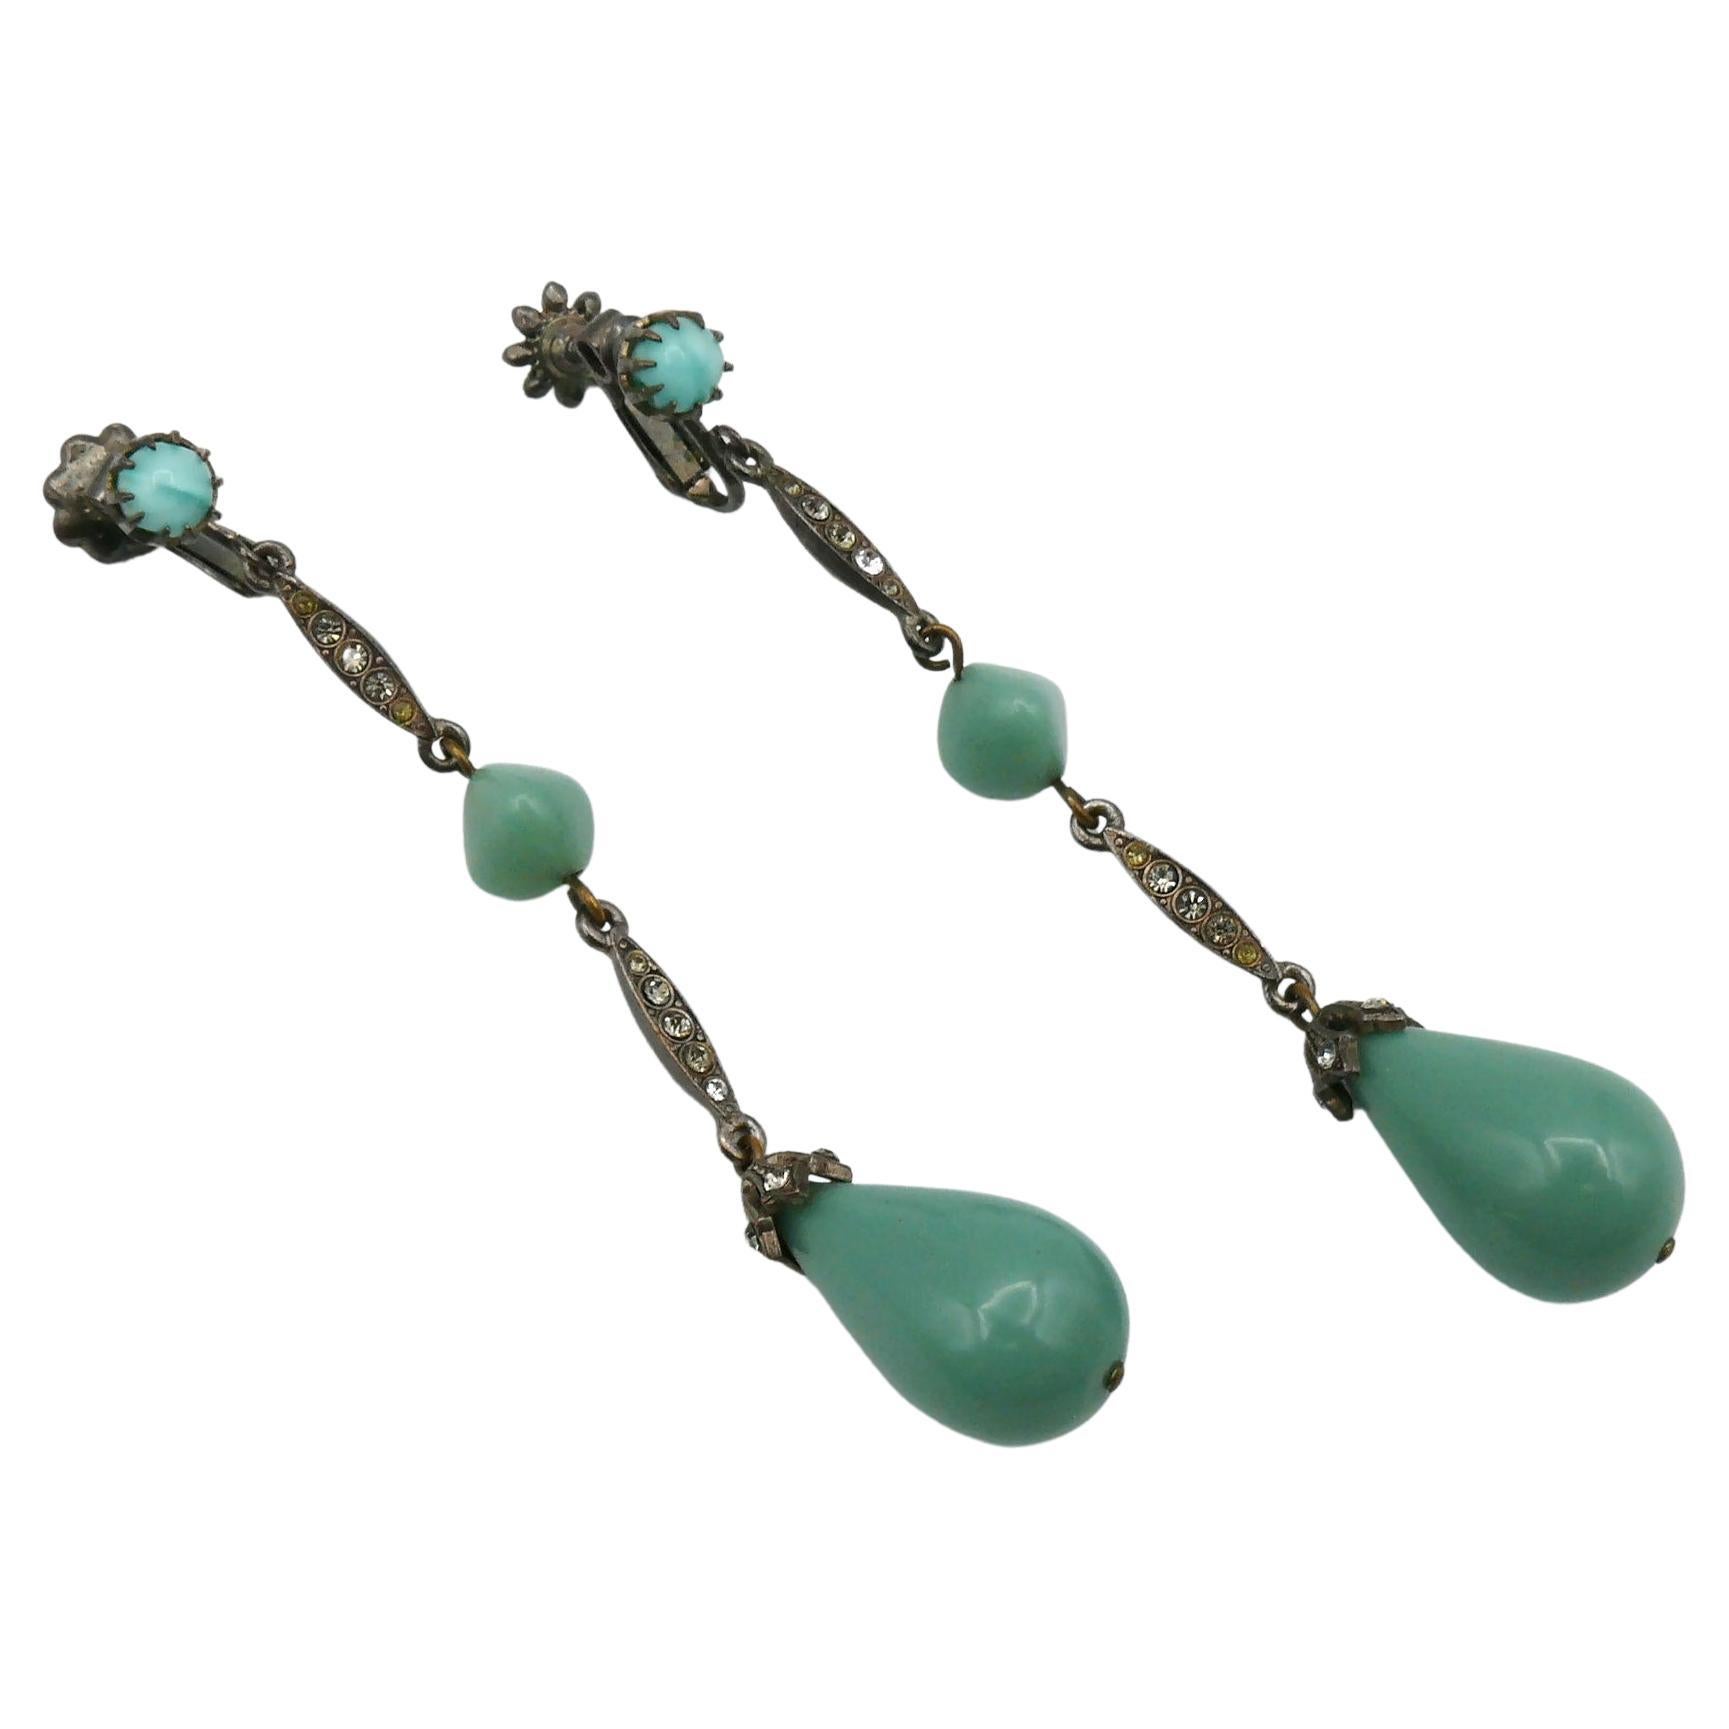 Christian Dior Boutique Vintage Victorian Insipred Faux Jade Dangling Earrings For Sale